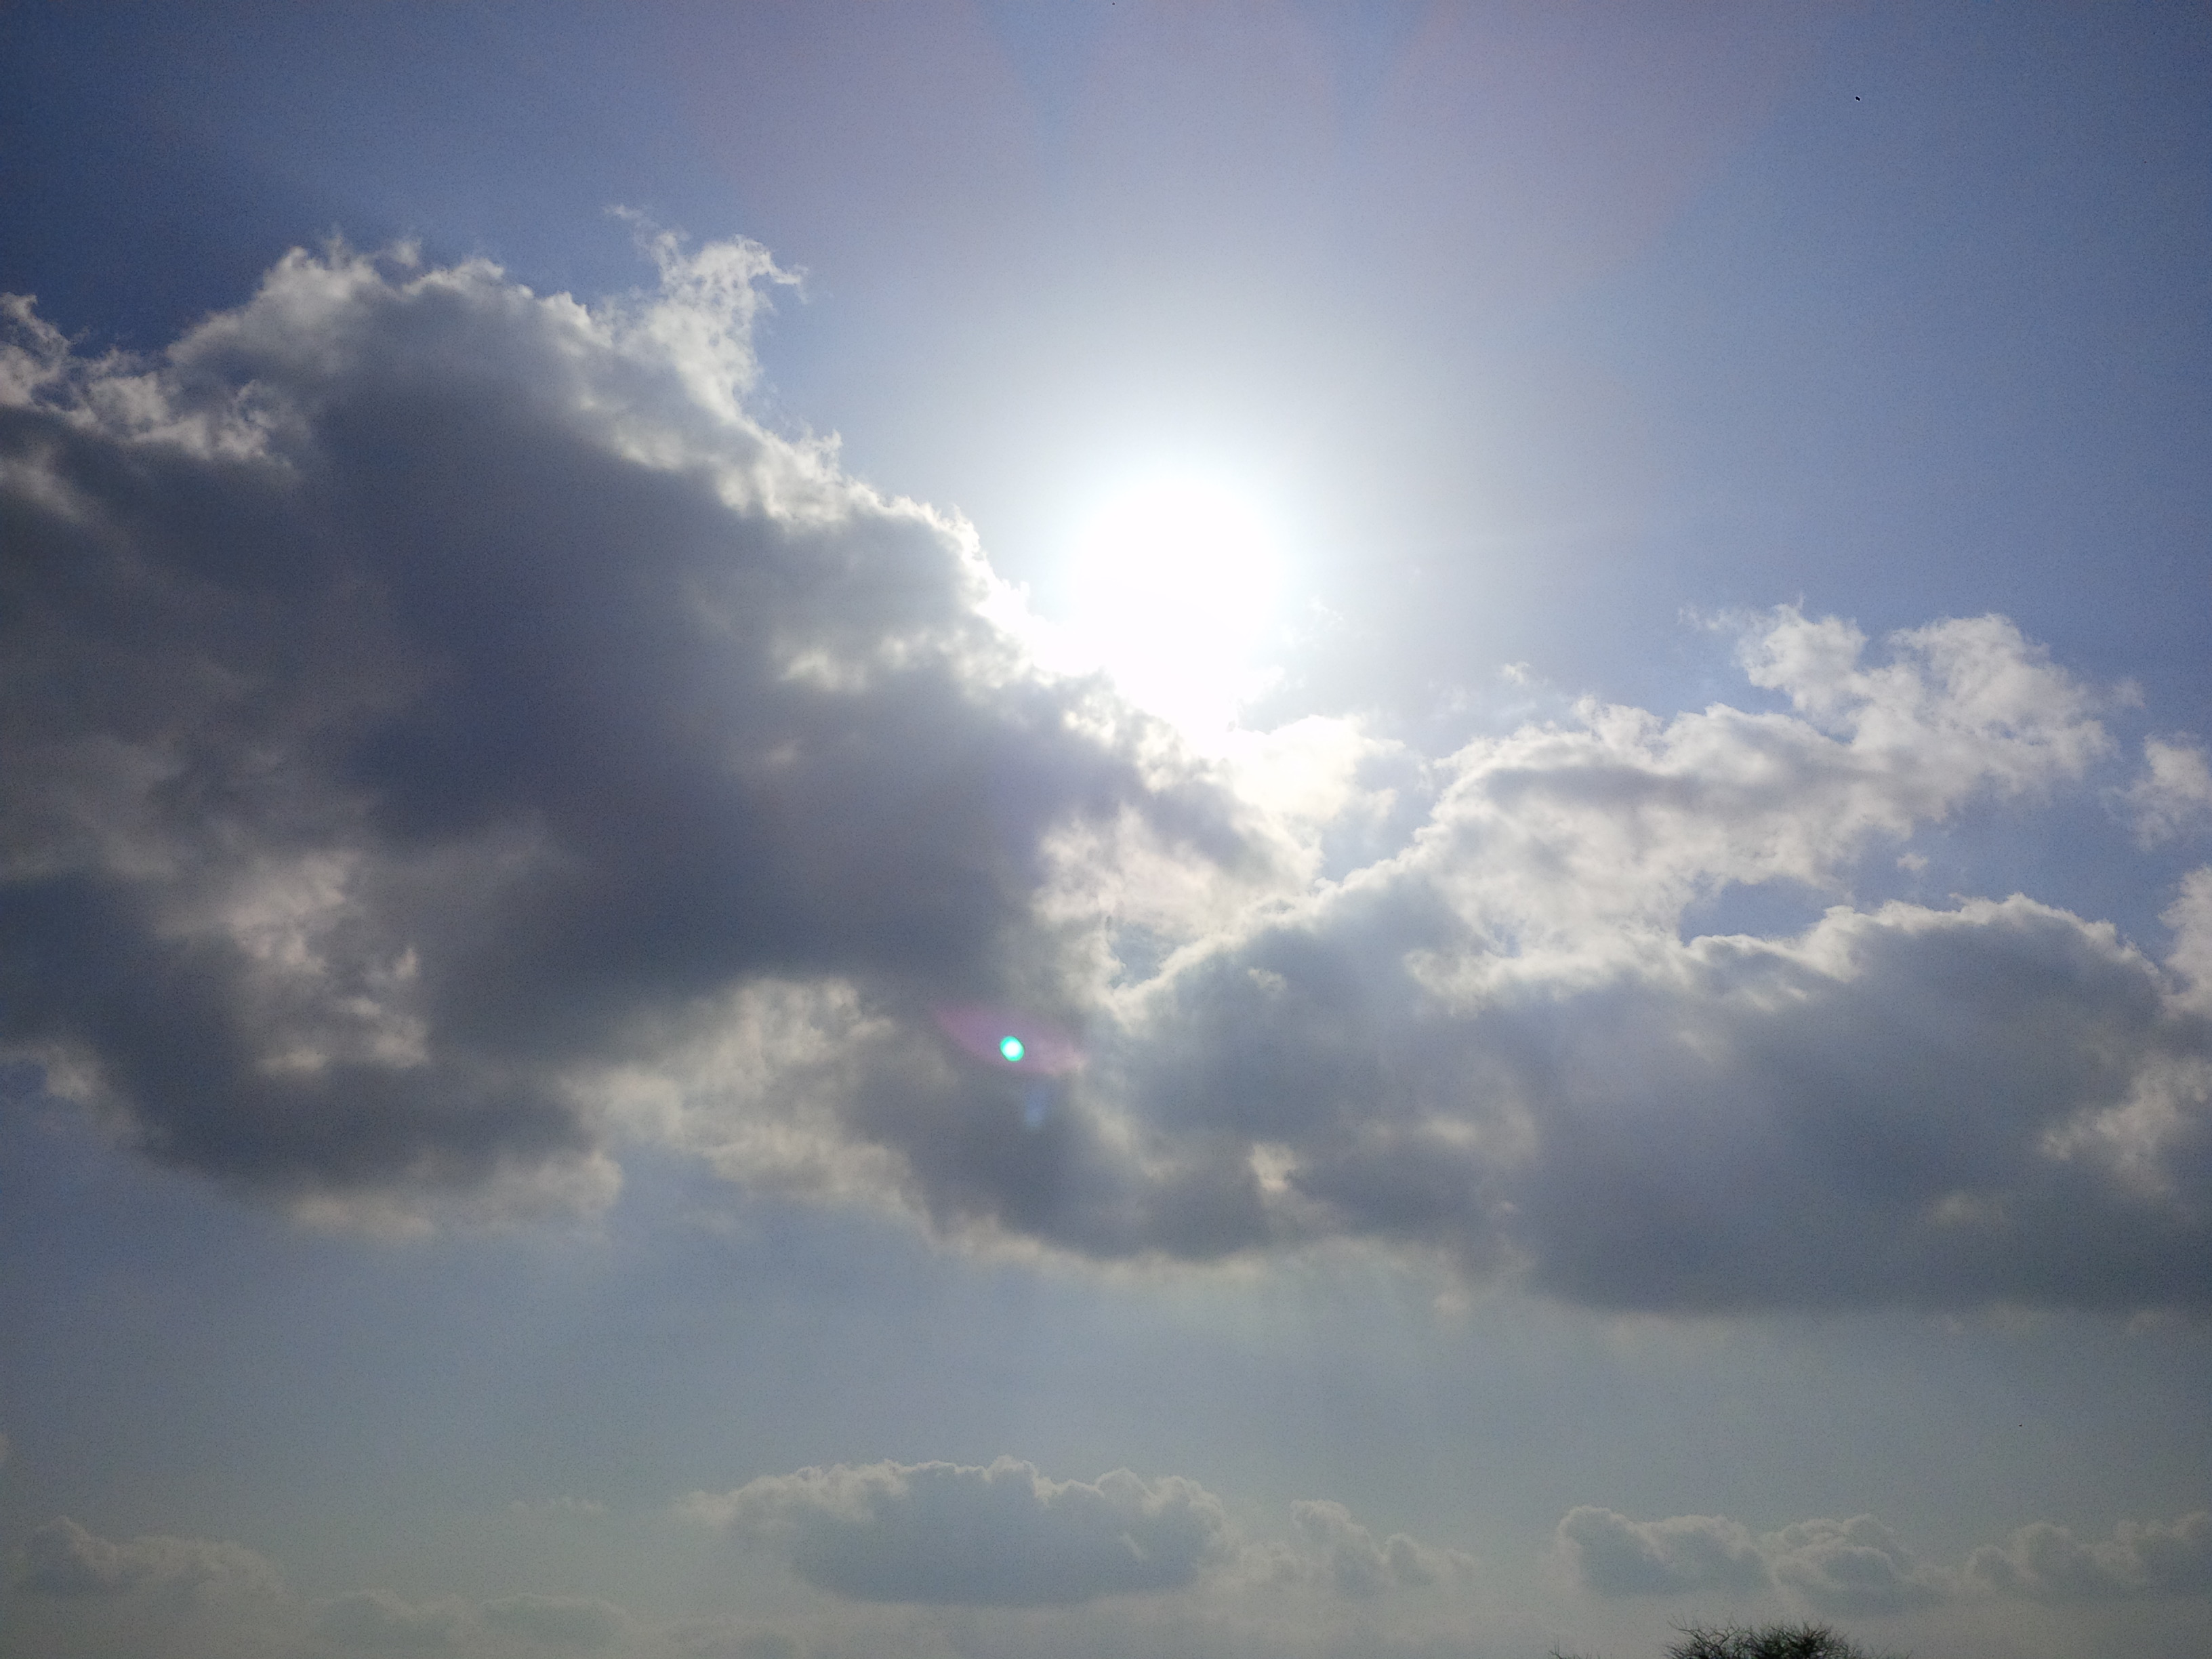 File:Sun behind the clouds punjab.jpg - Wikimedia Commons